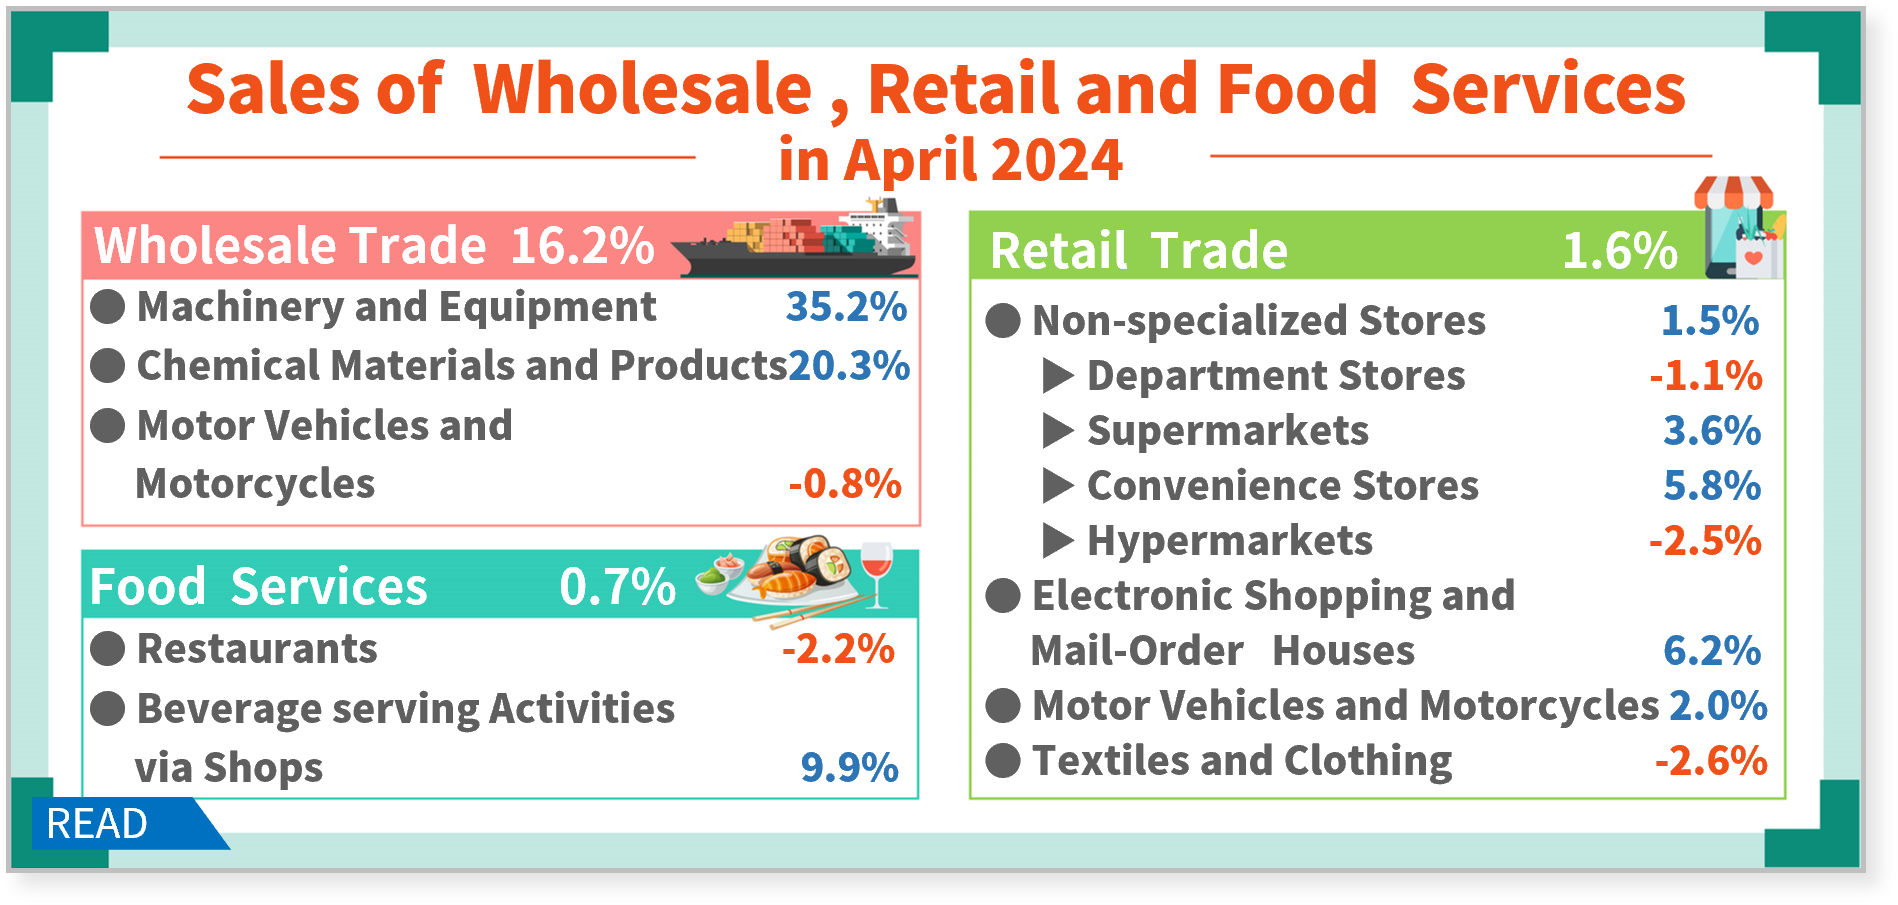 Sales of Wholesale, Retail and Food Services in April 2024